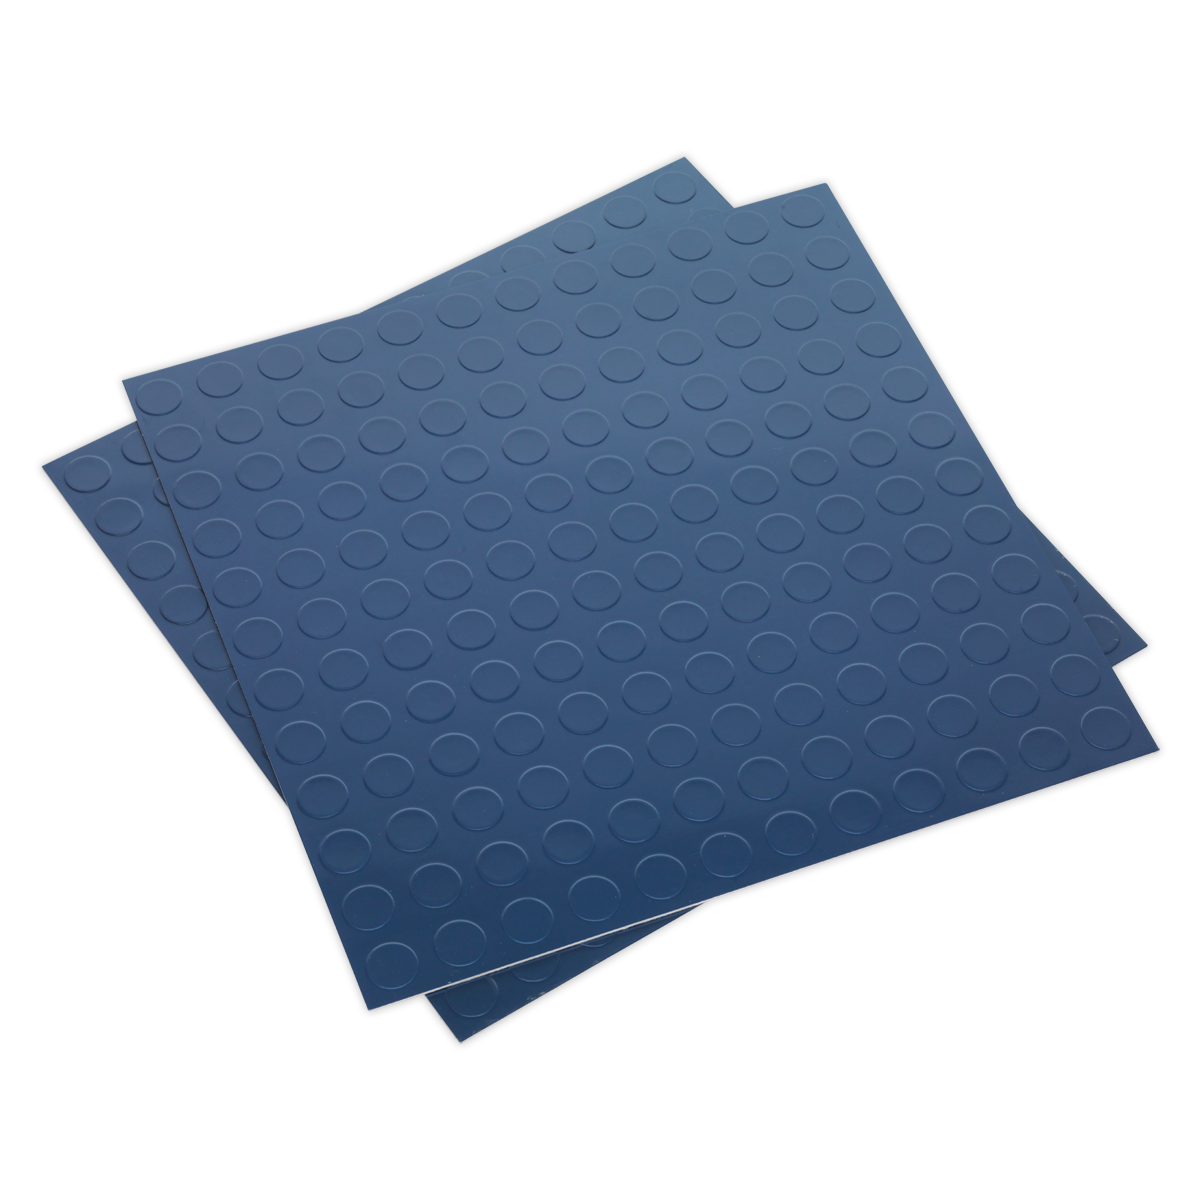 Vinyl Floor Tile with Peel & Stick Backing - Blue Coin Pack of 16 - FT2B - Farming Parts